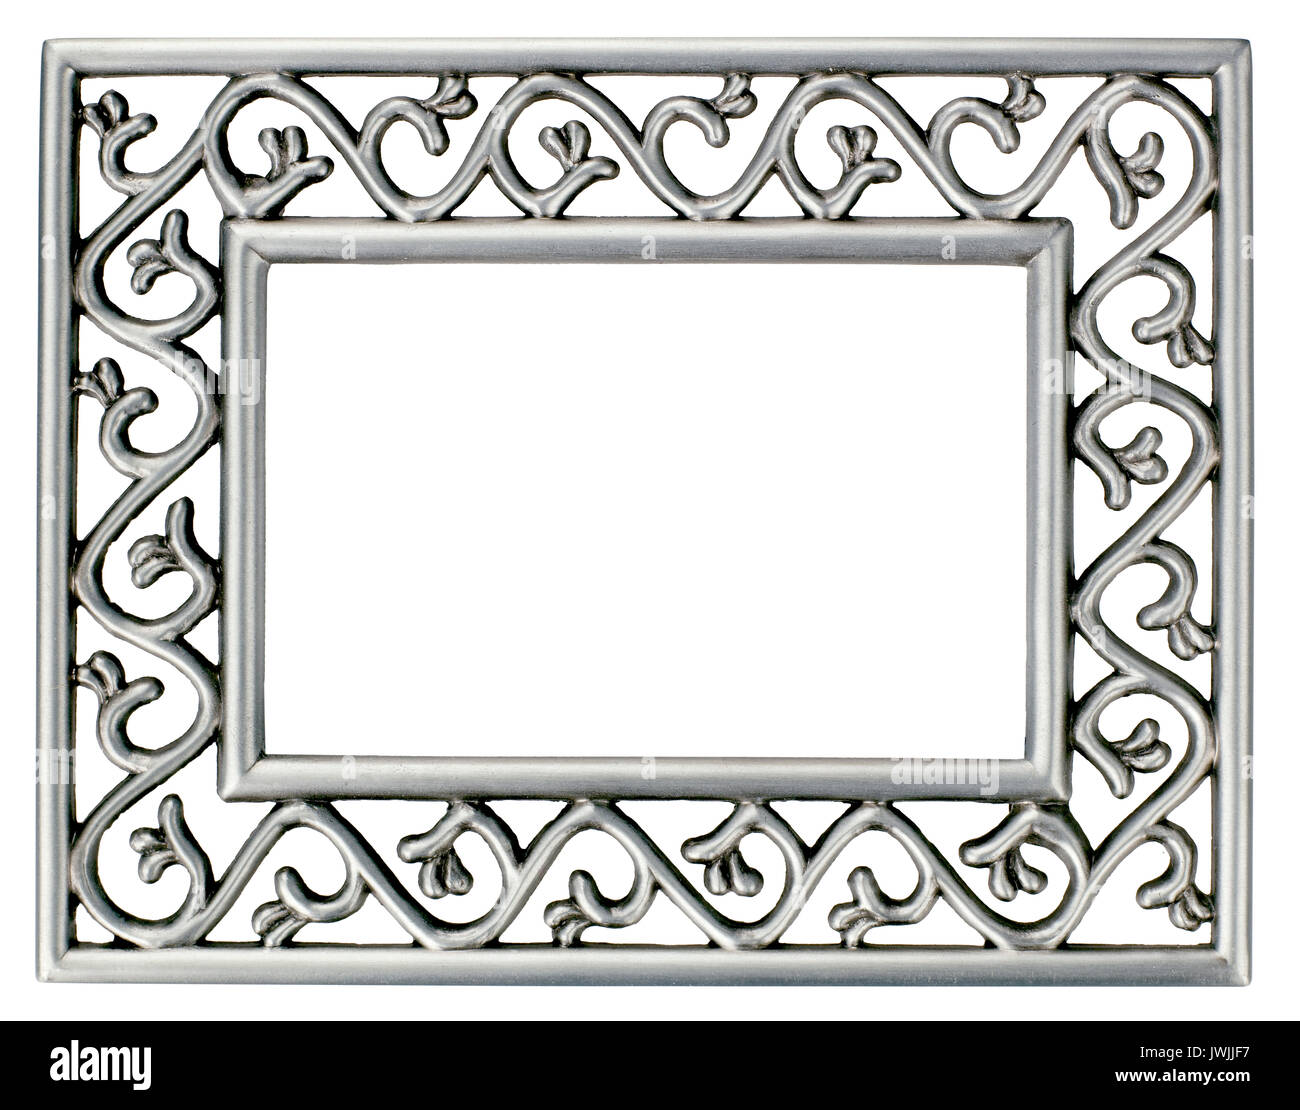 Metal Picture frame Stock Photo